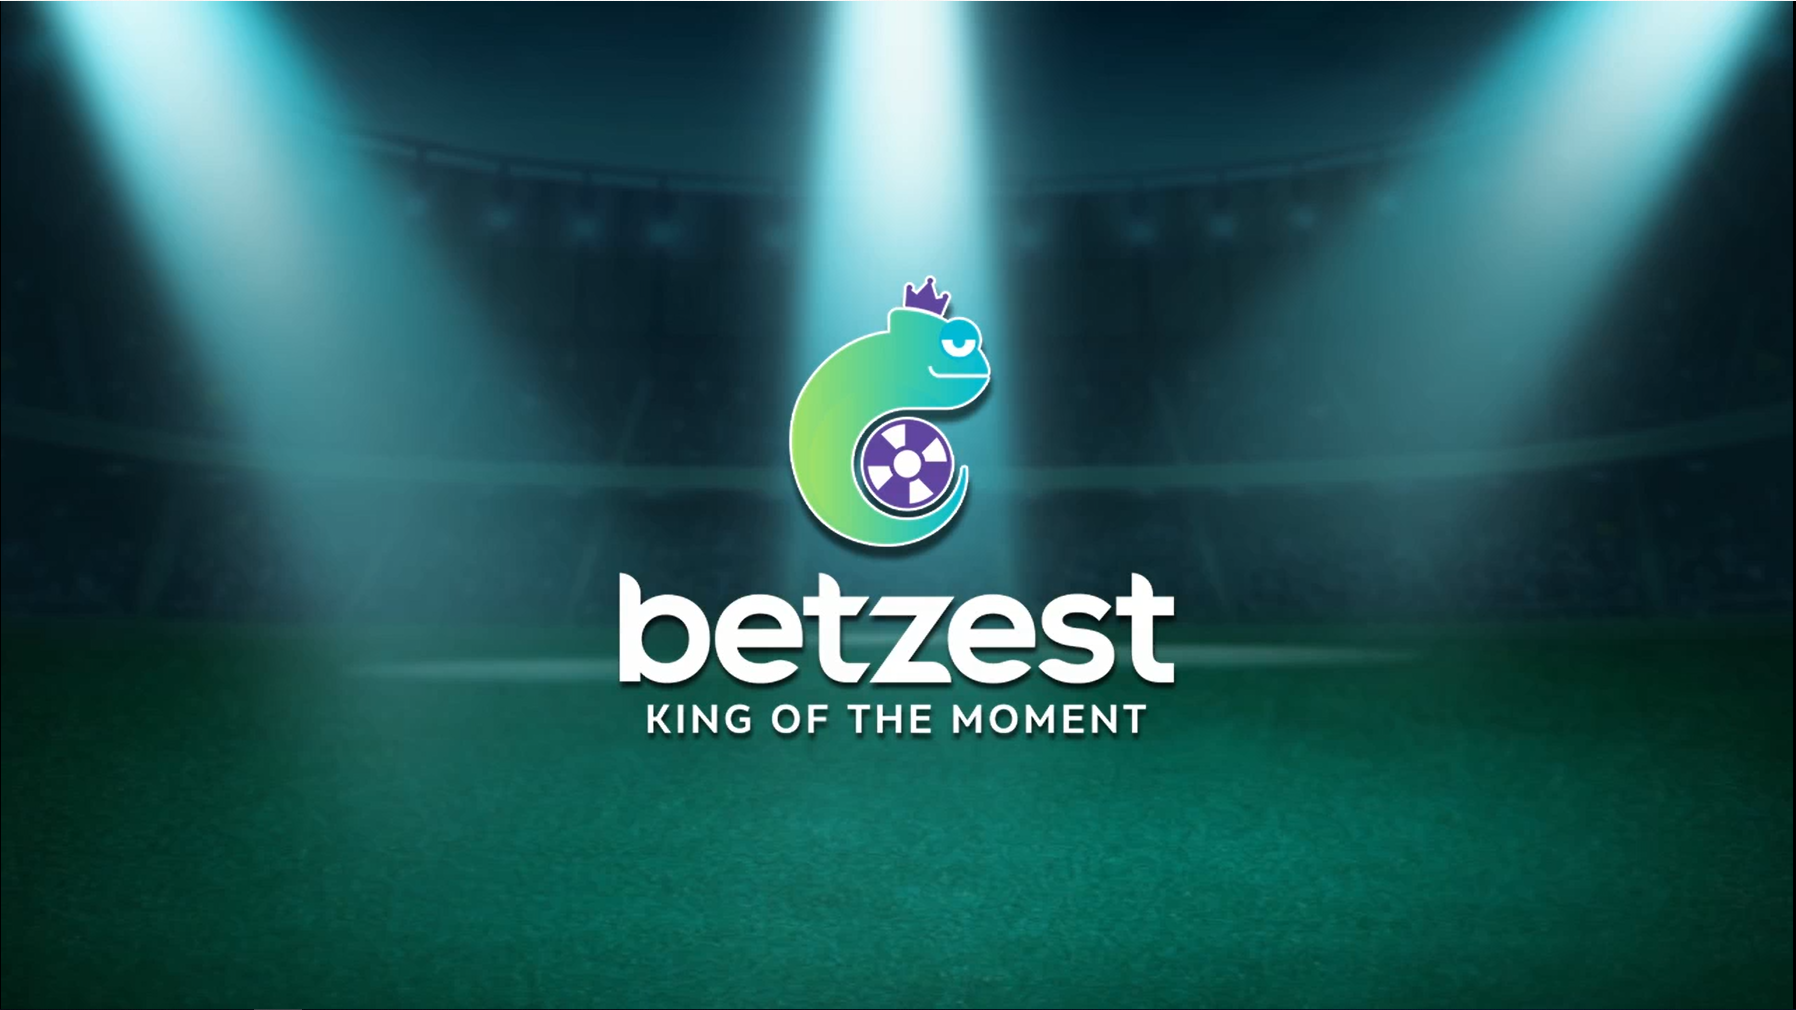 Badminton betting guide with Betzest